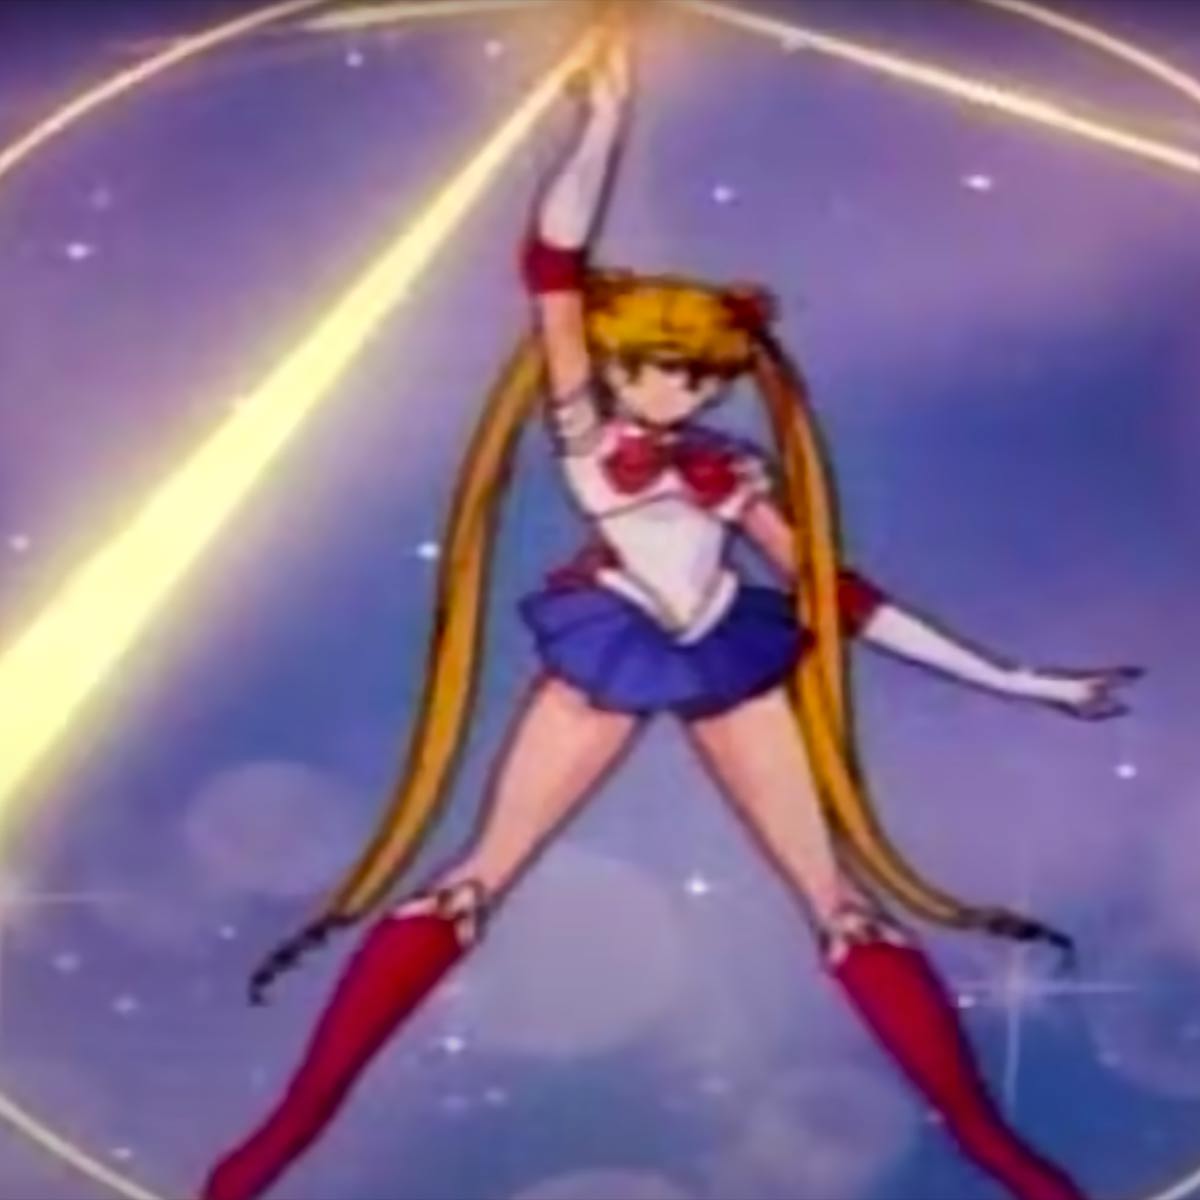 Stream The Sailor Moon Sailor Stars Theme Song by The Anime and